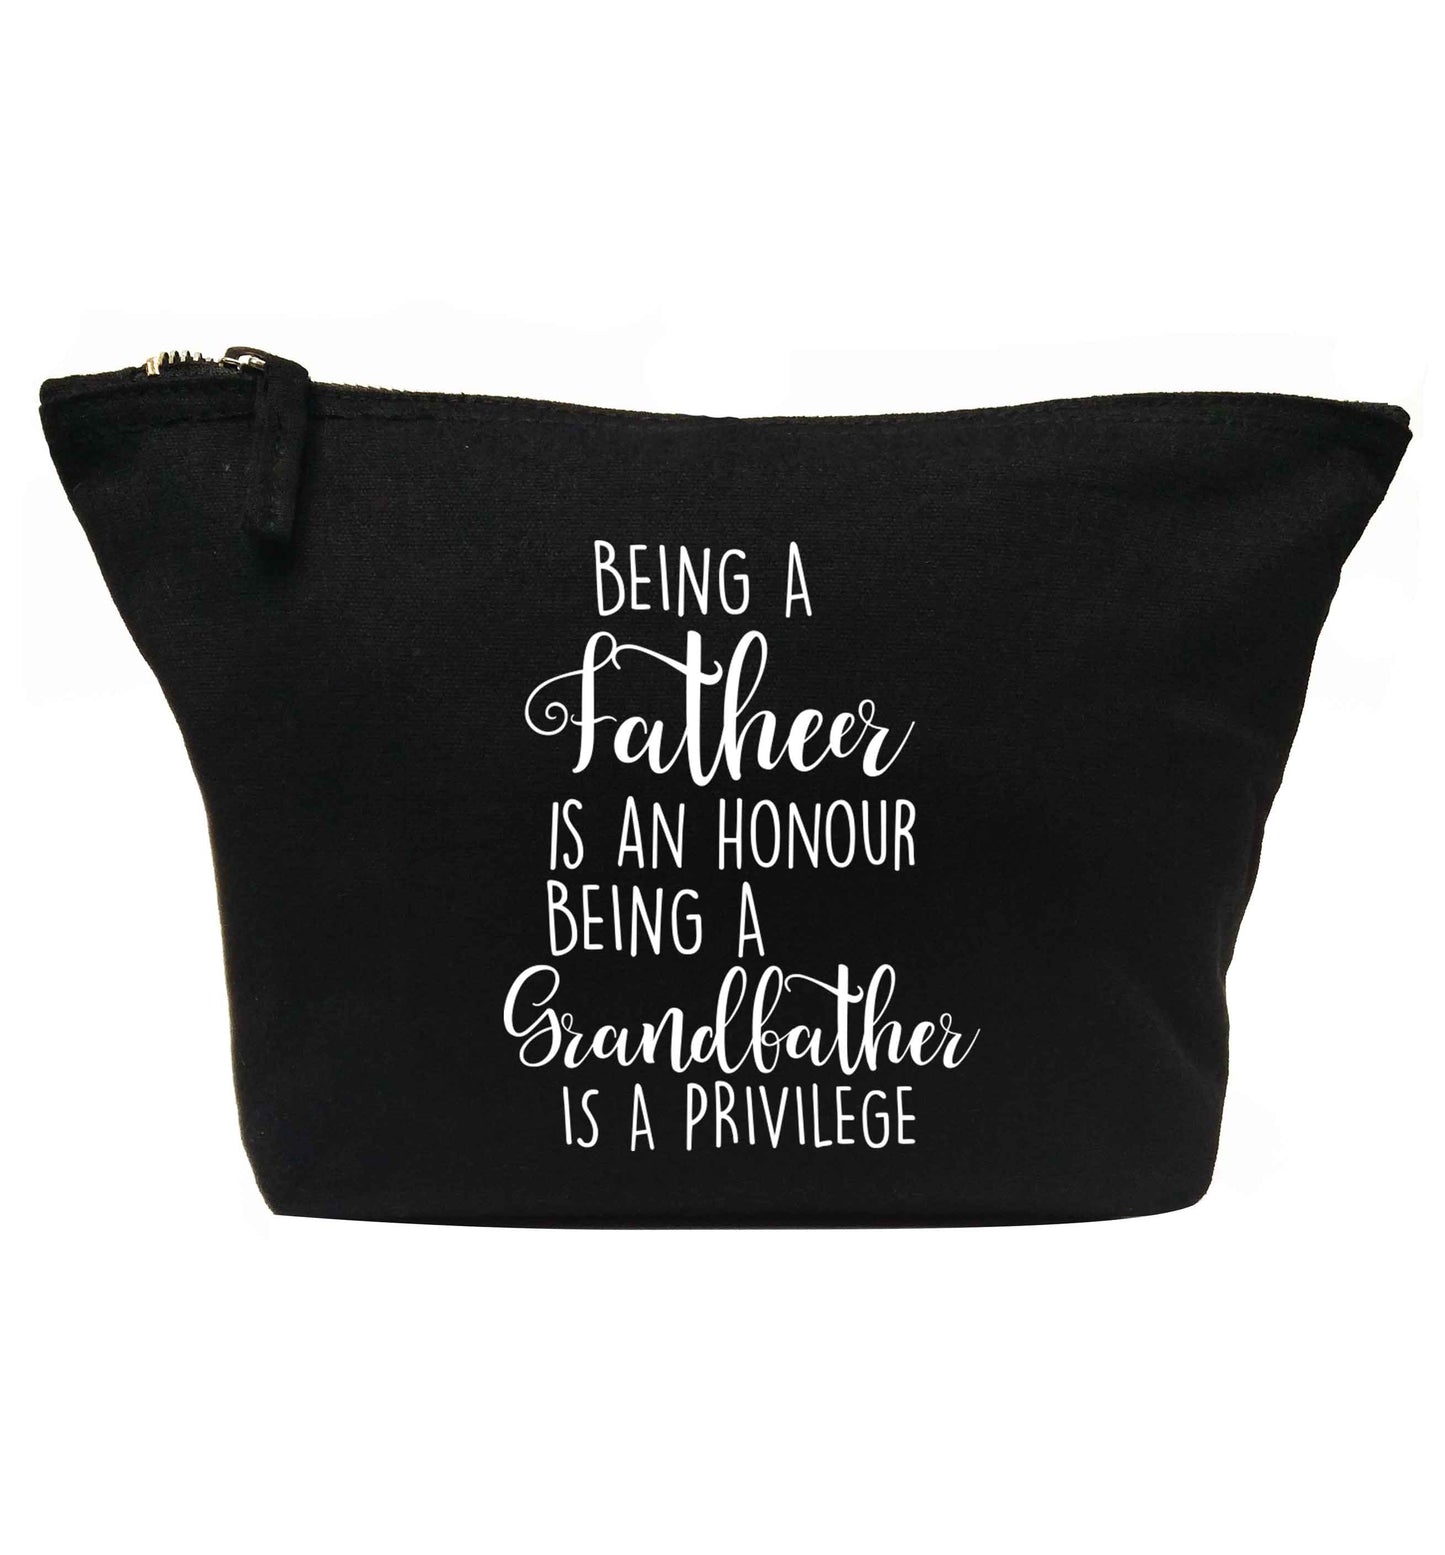 Being a father is an honour being a grandfather is a privilege | makeup / wash bag